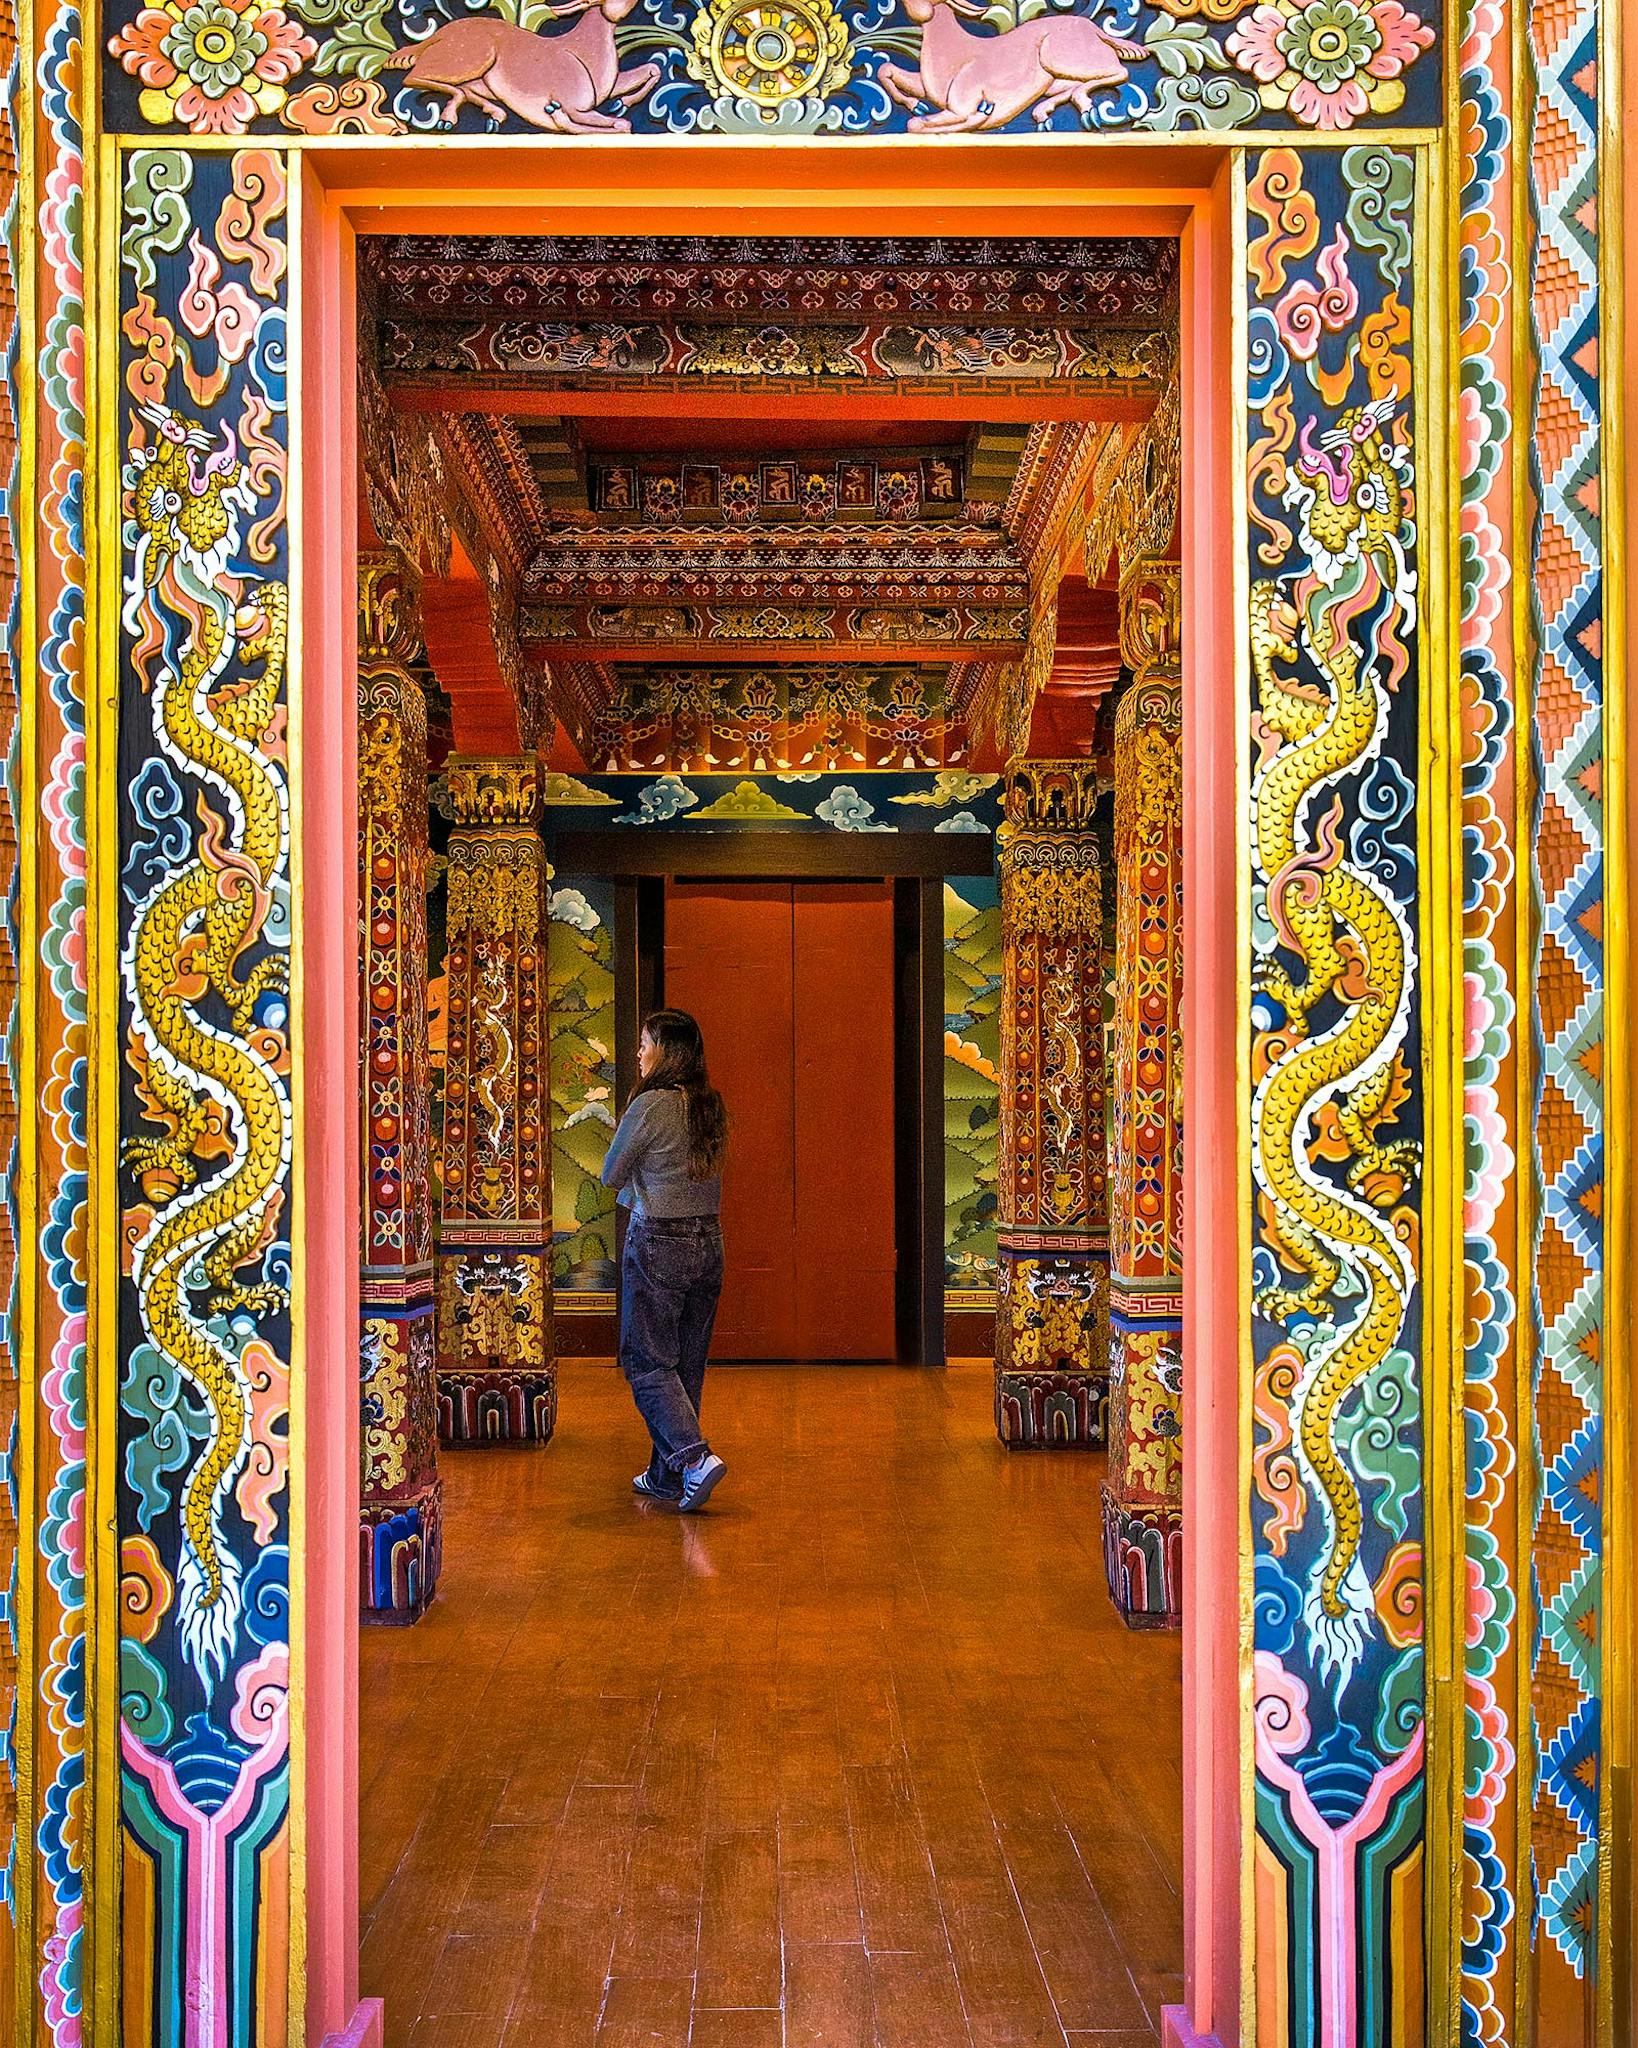 Painted images of dragons can be seen on the doors to the Lhakhang.